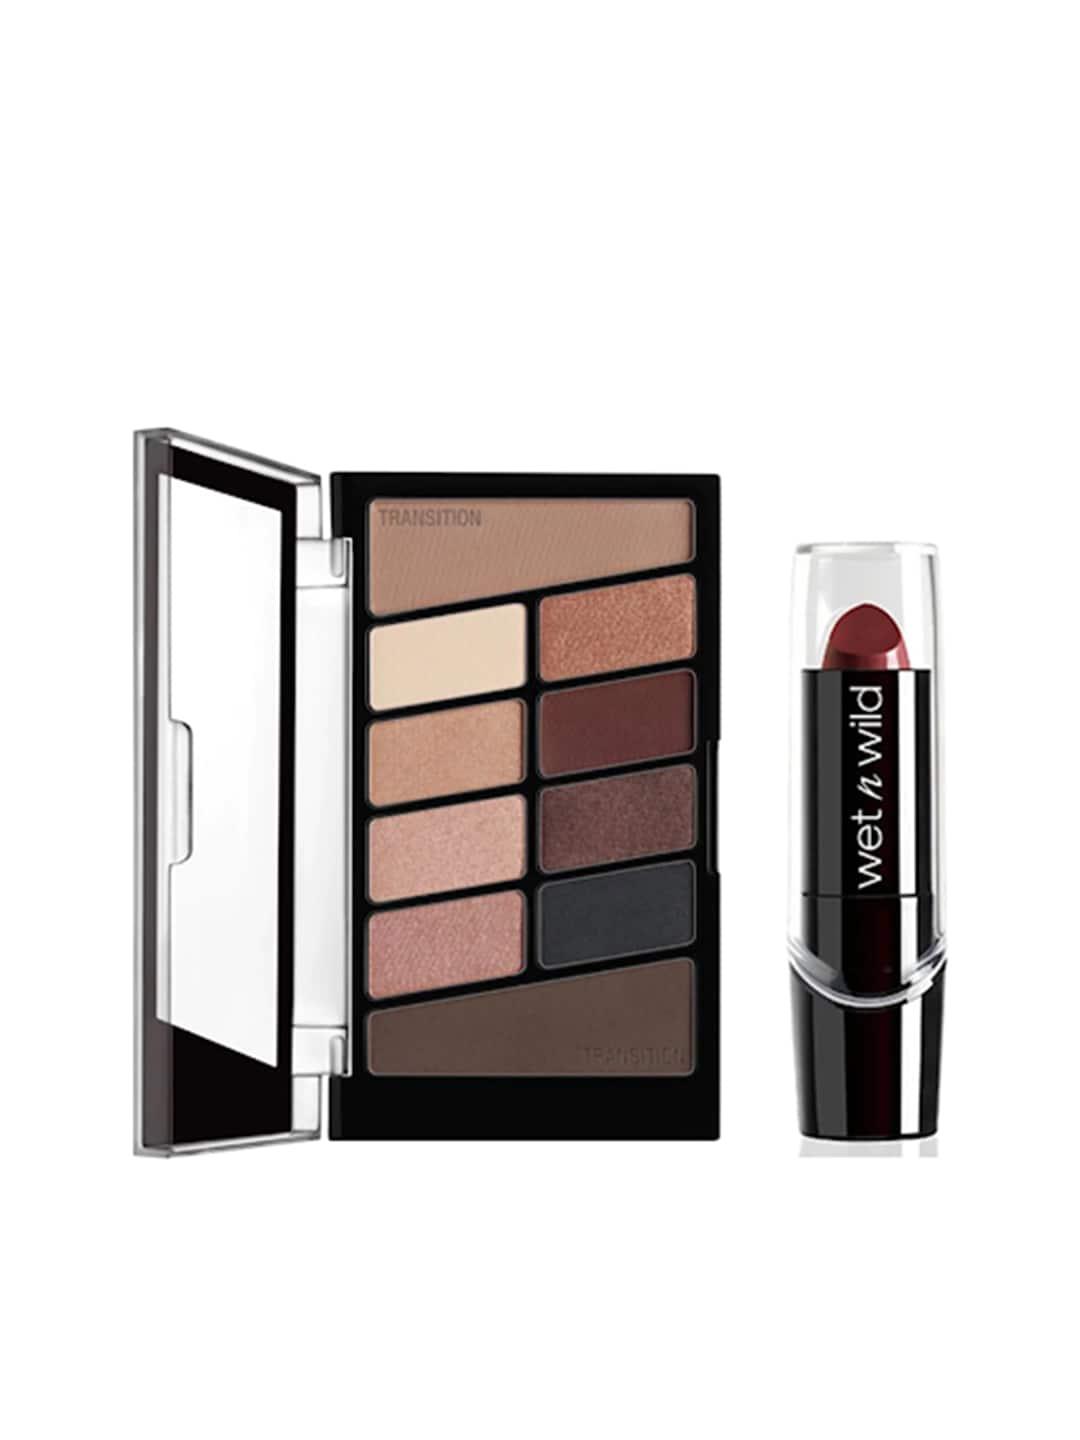 wet n wild sustainable set of silk finish lipstick & color icon 10 pan eyeshadow palette